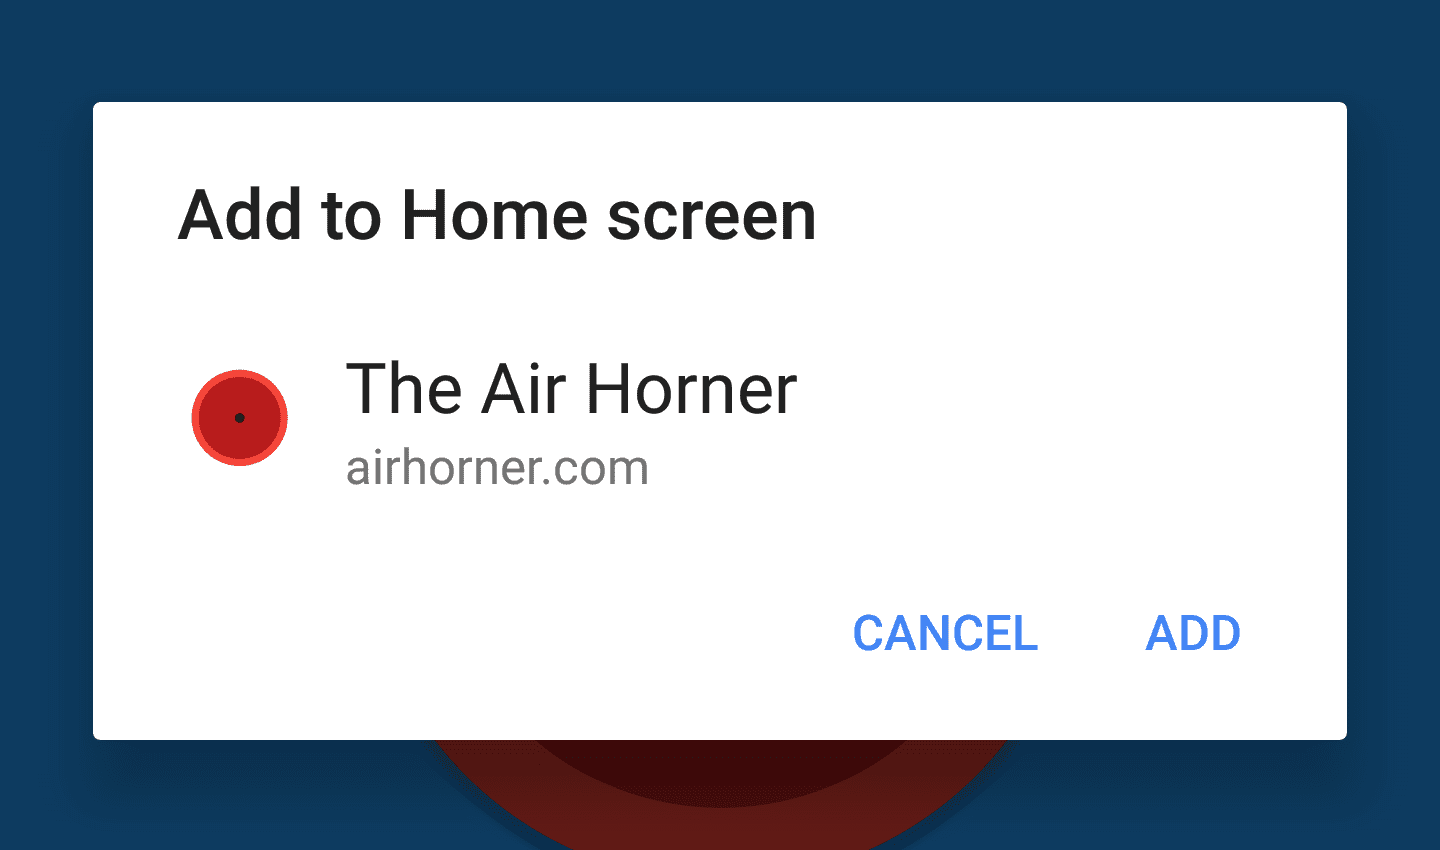 Add to home screen dialog.